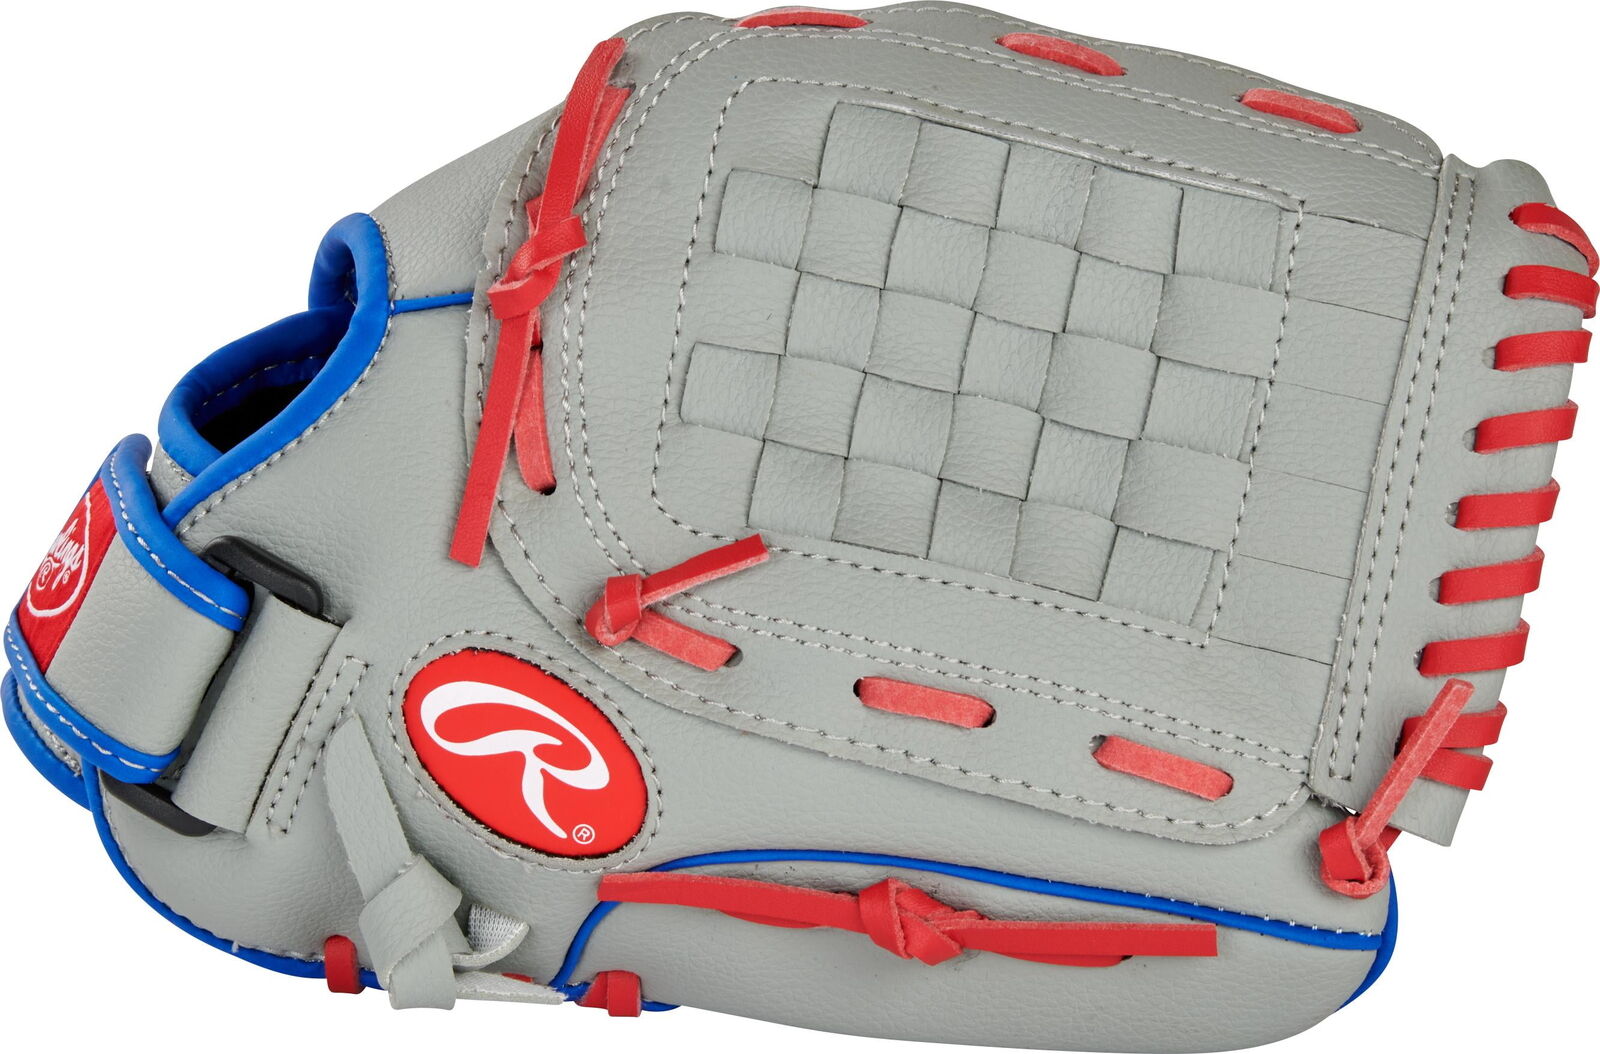 Players Series Youth Tball/Baseball Glove, Gray/Blue/Red, 11.5 inch, Right Hand 